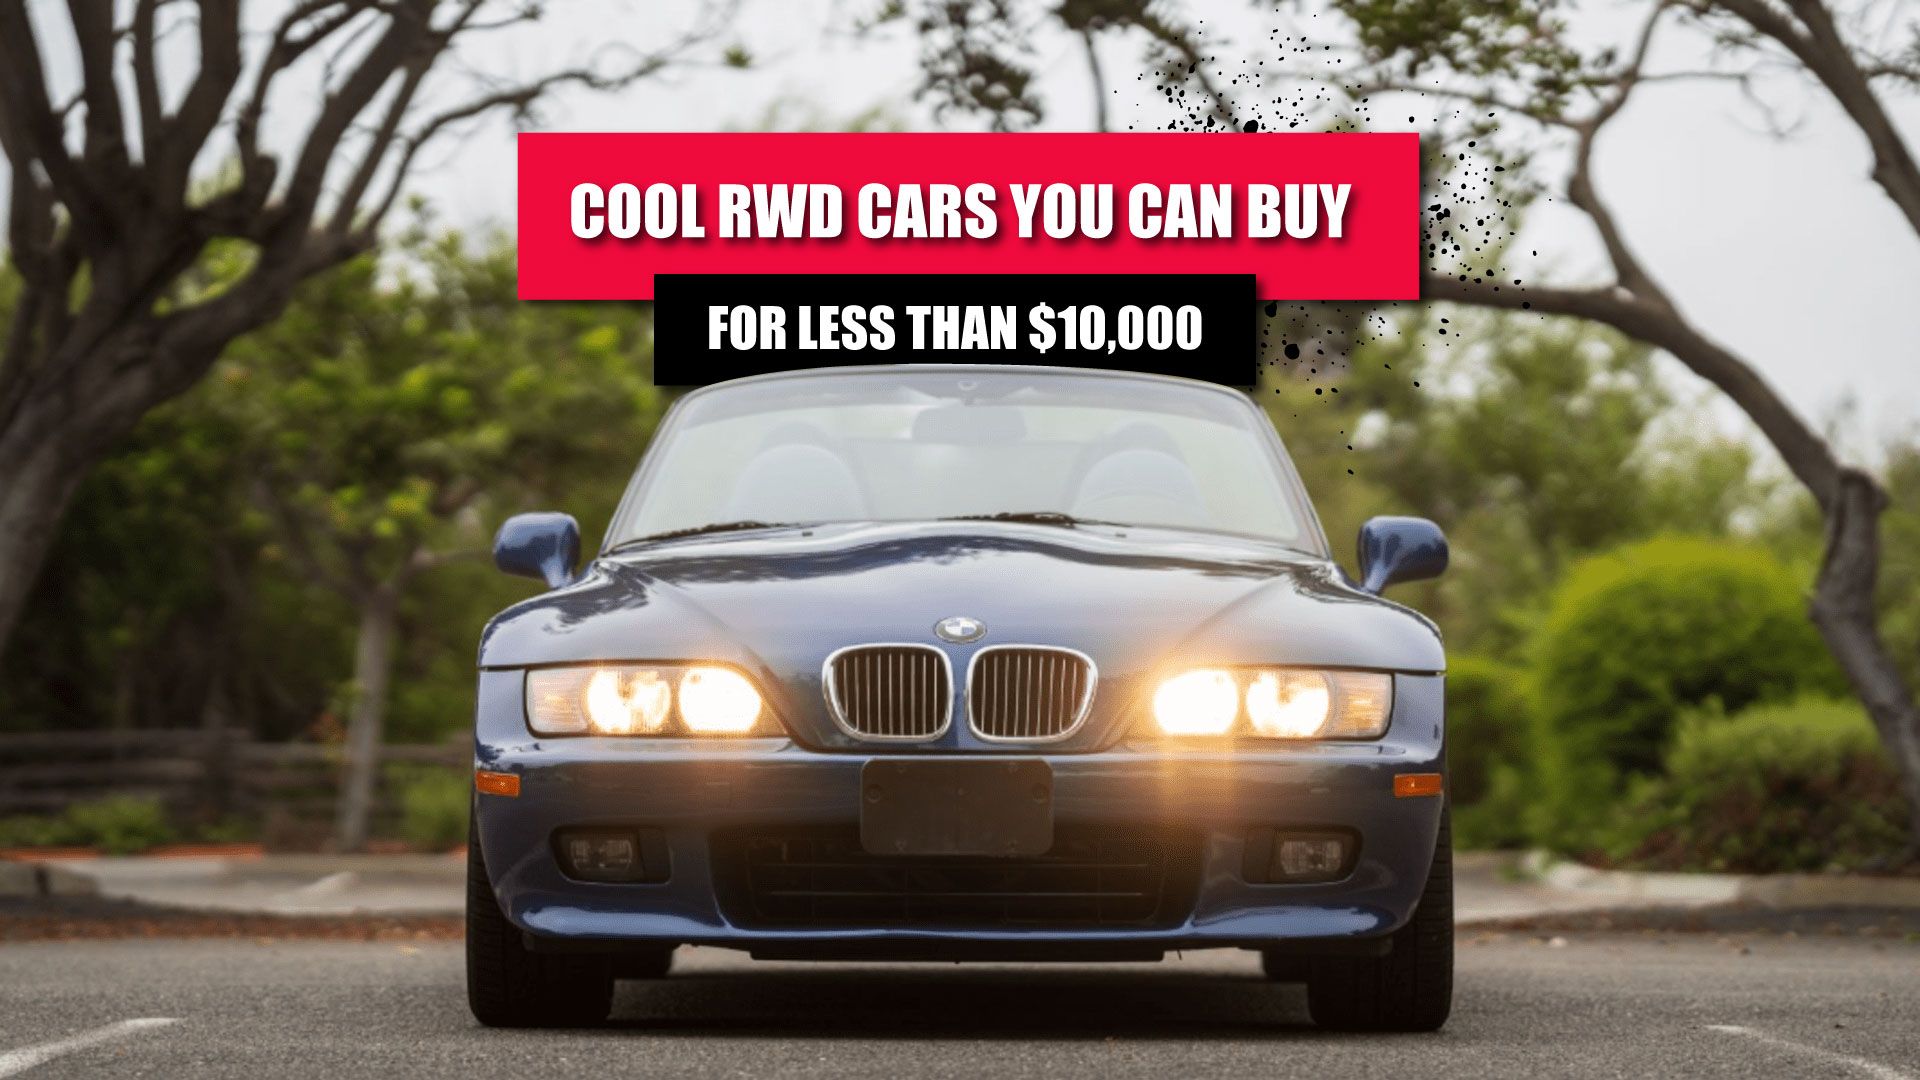 2000 BMW Z3 Featured Image